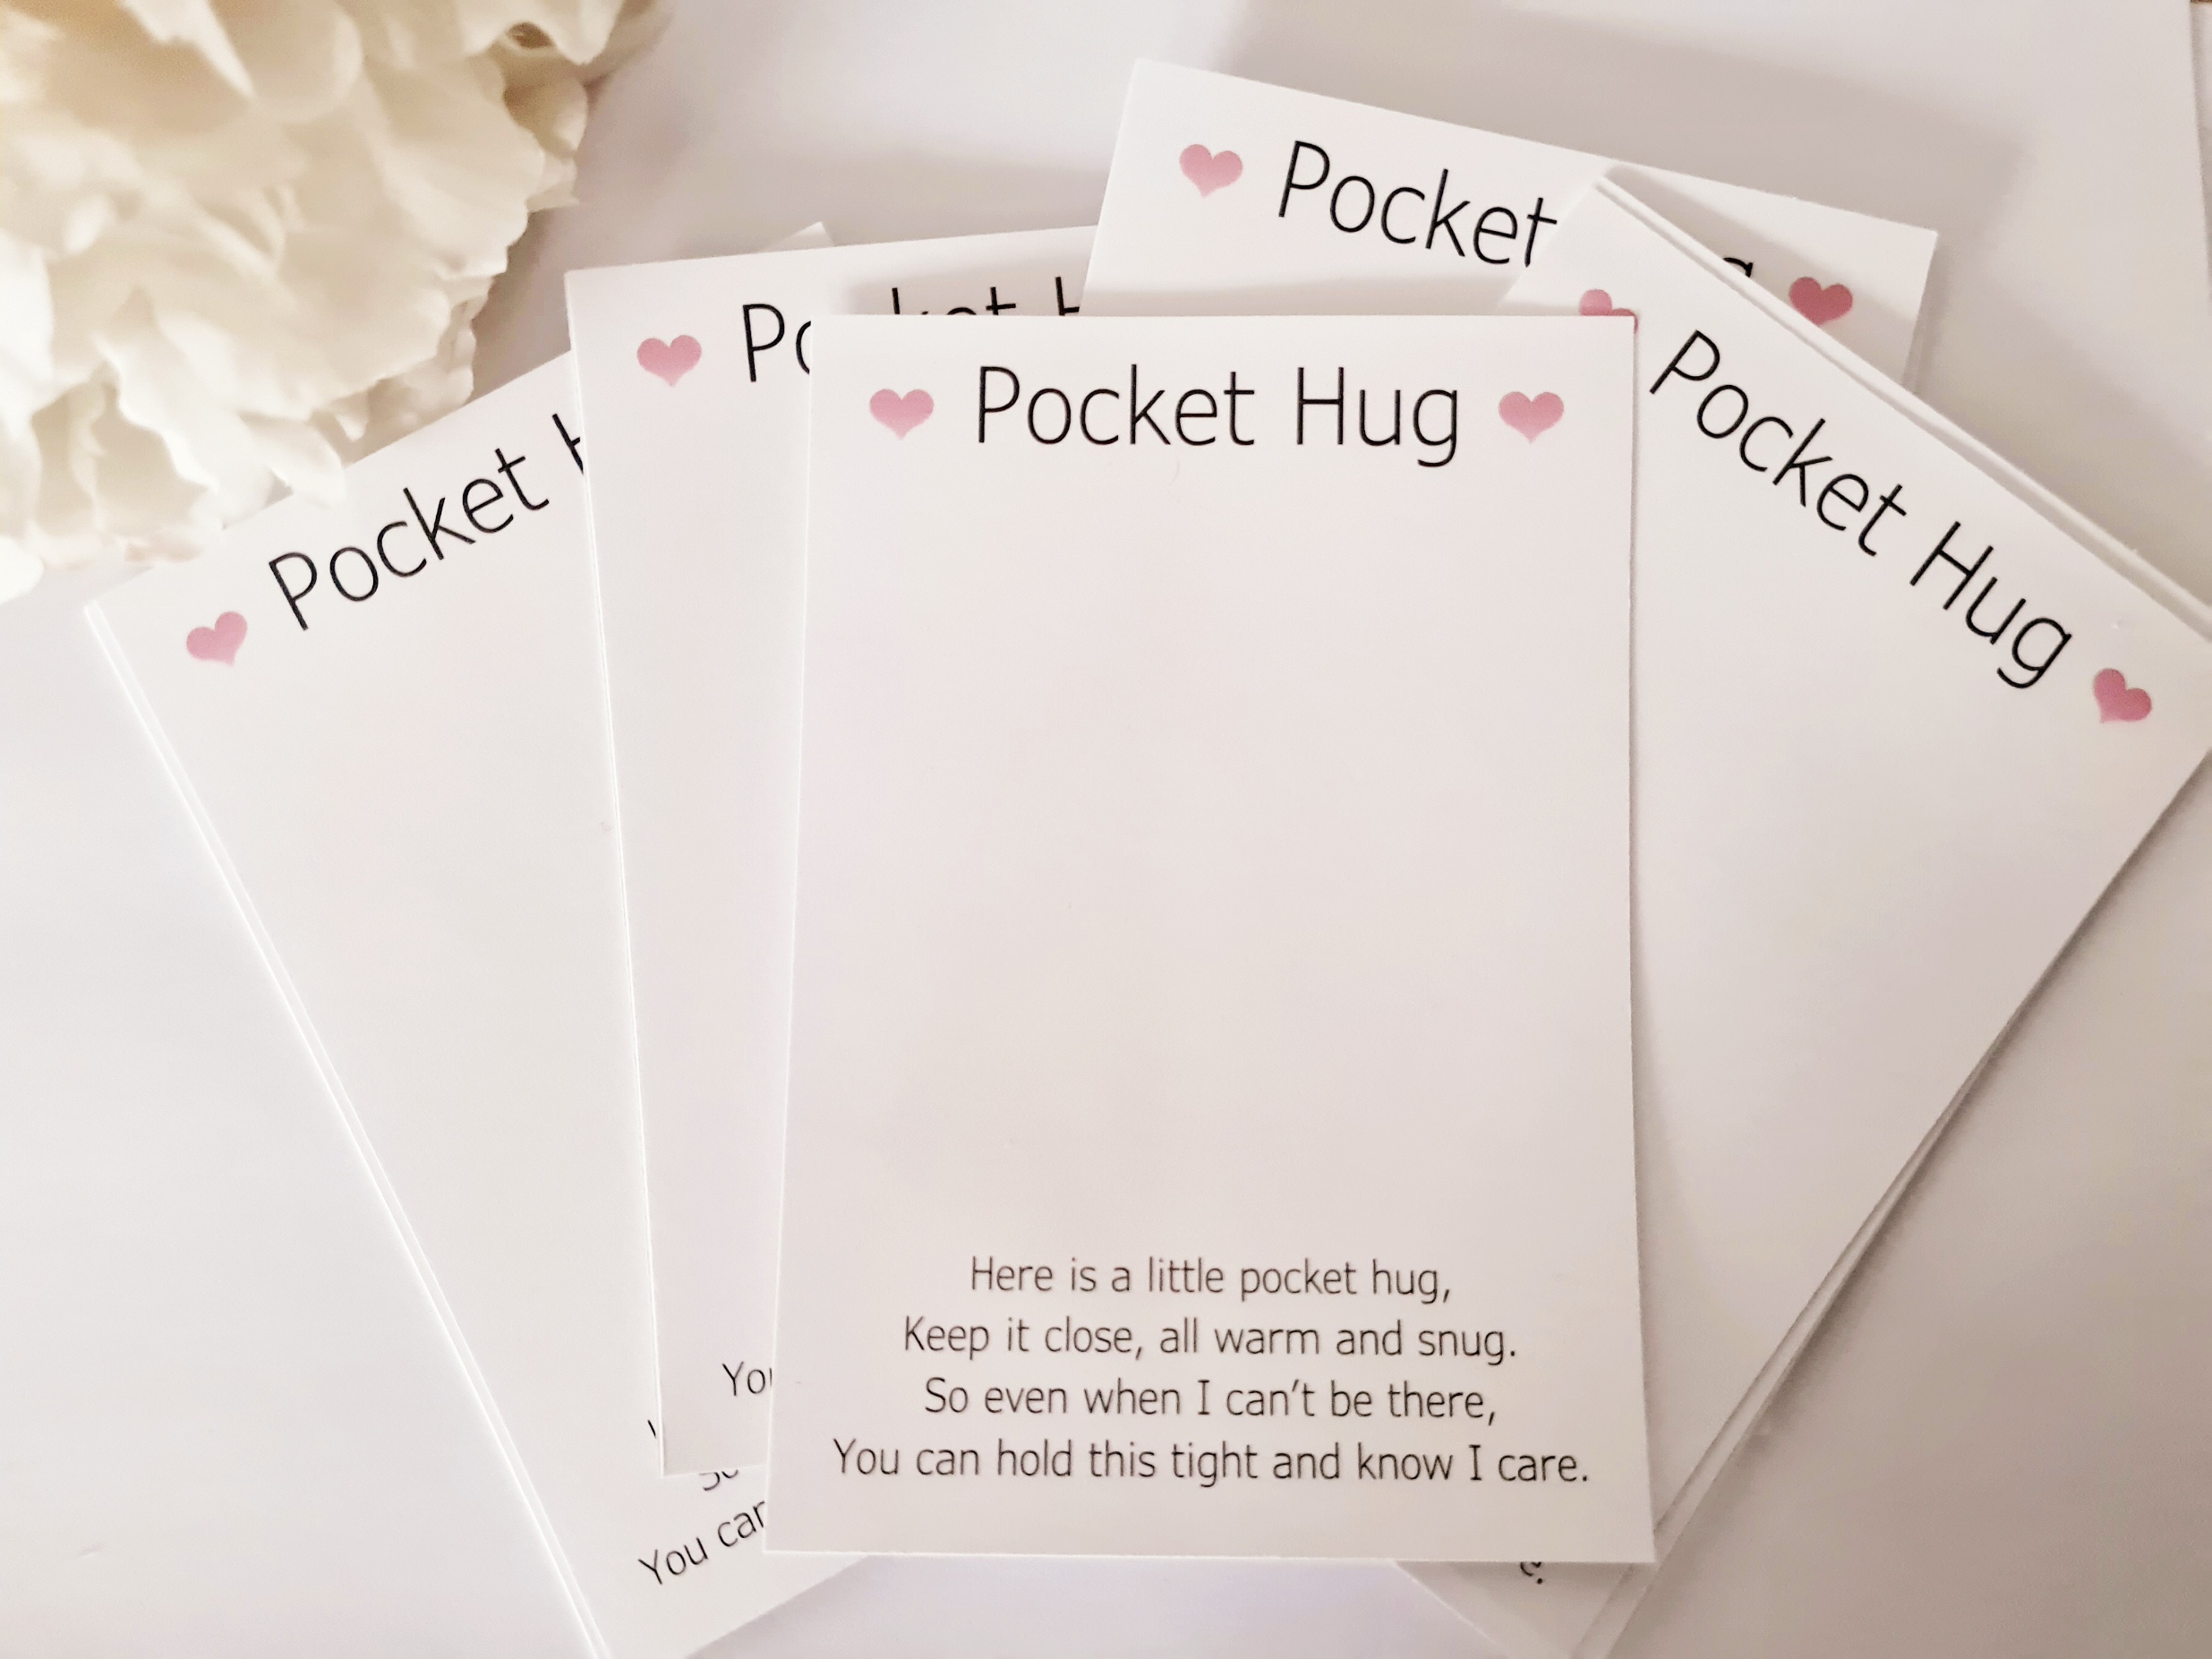 Pocket hug backing cards business crafting large or small gift 20/40/80/104